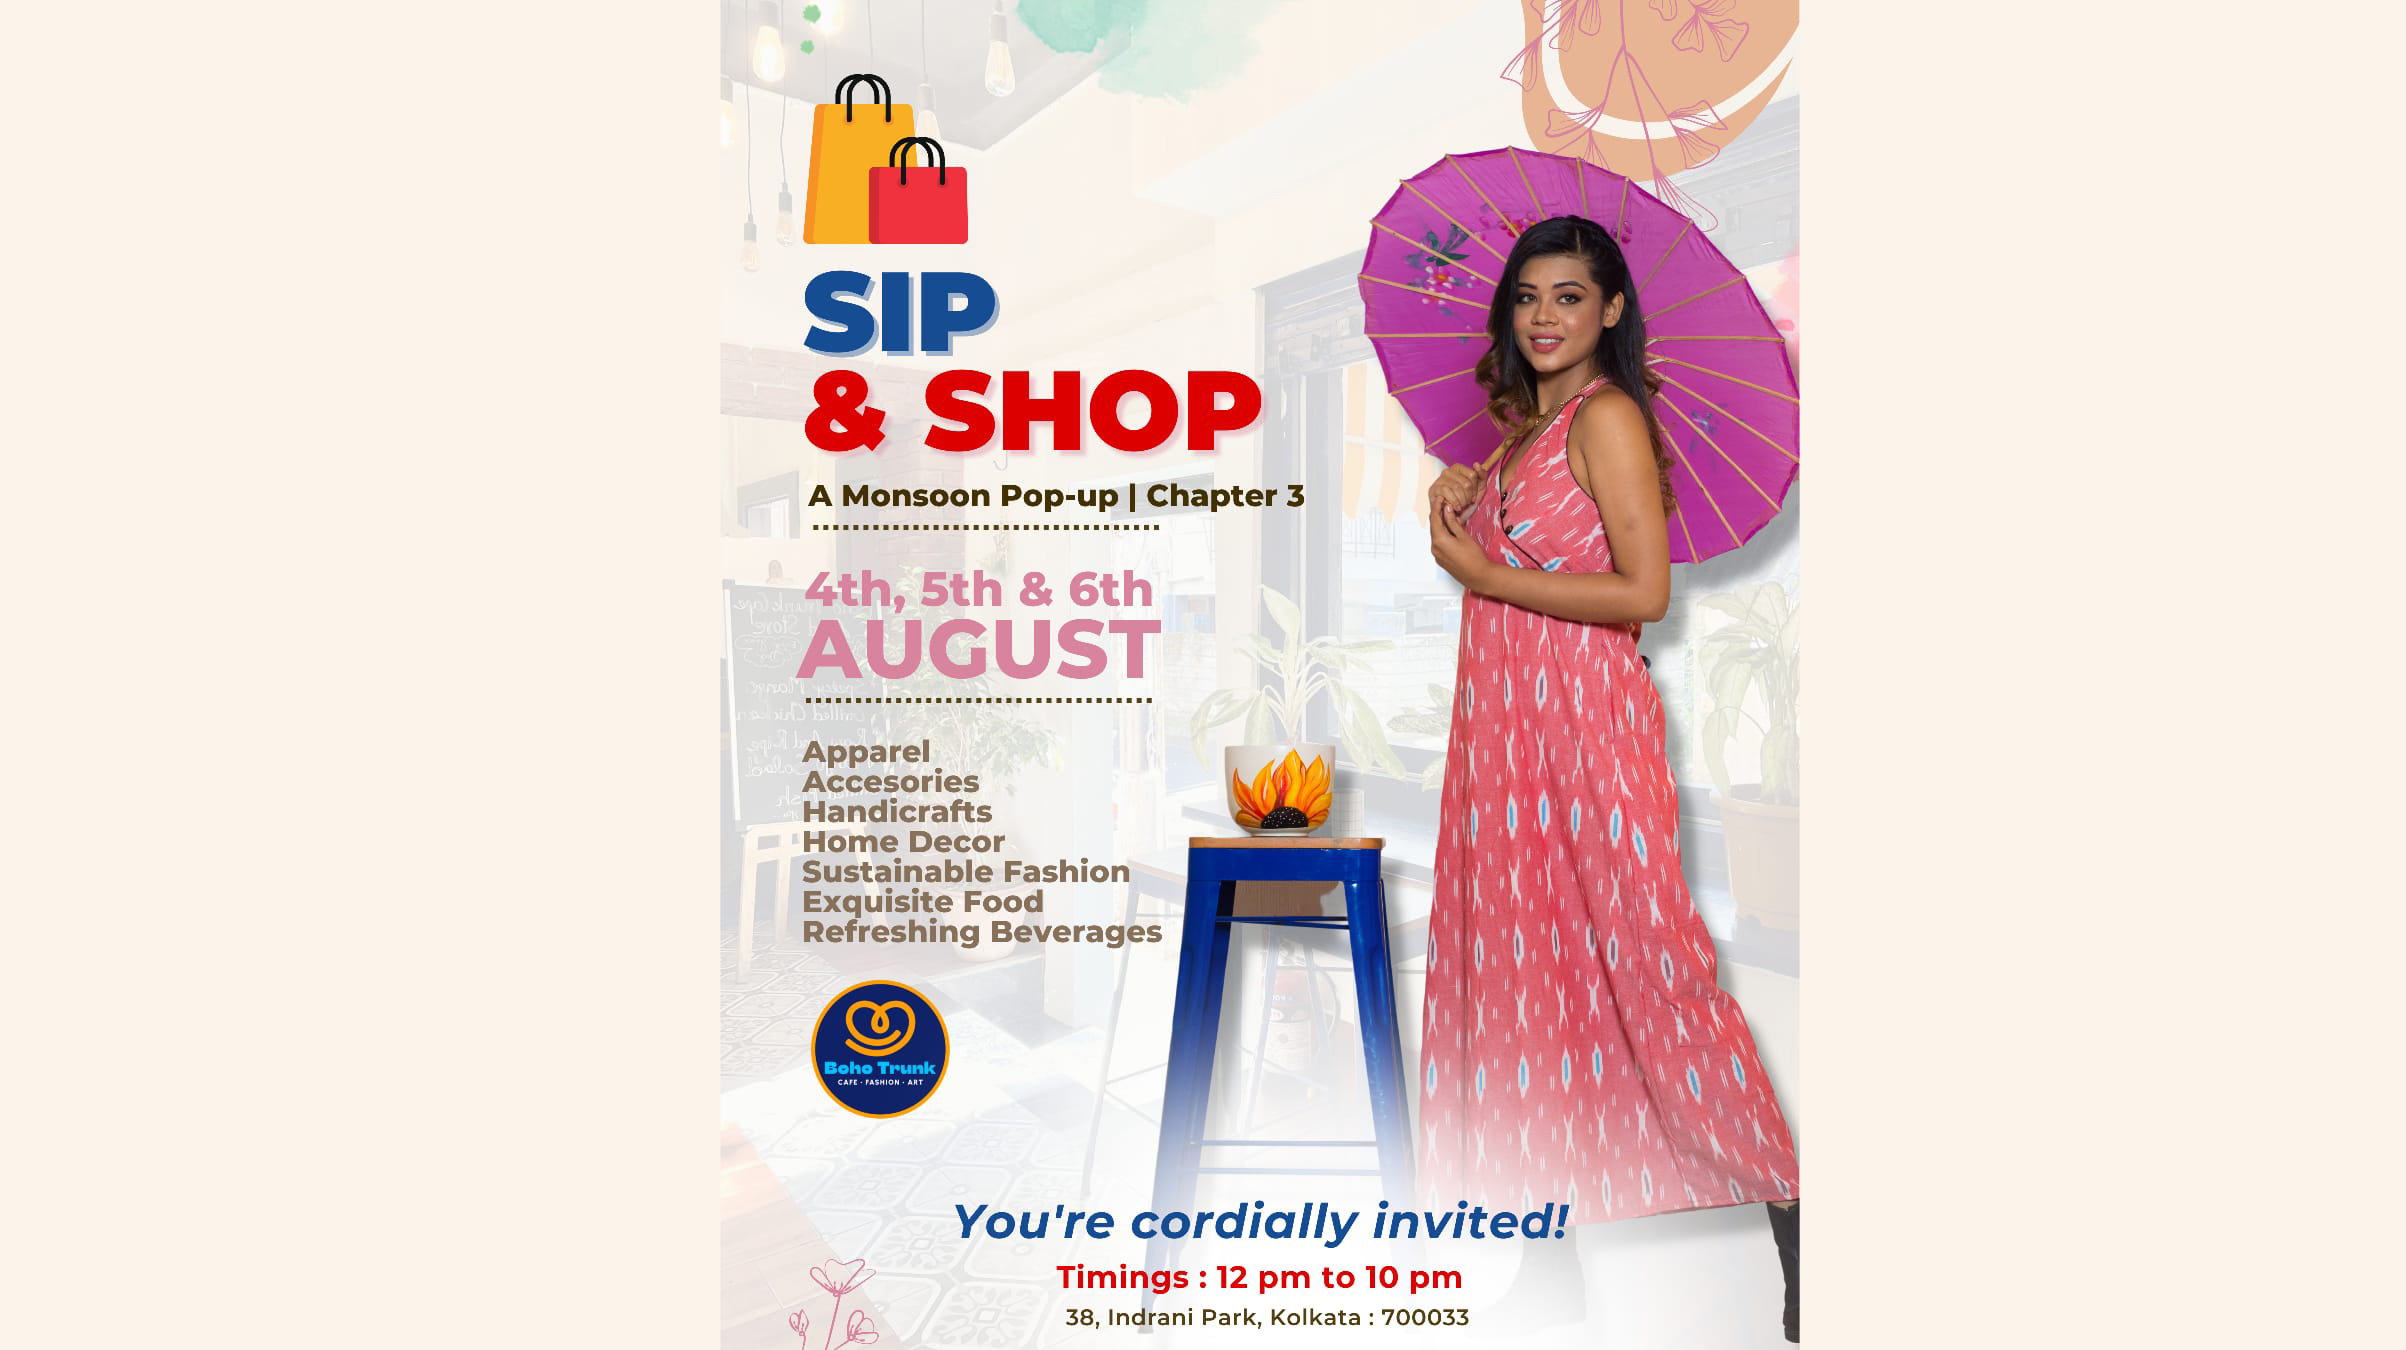 🛍️Shop until you drop at the ☕Boho Trunk Cafe & Store’s Sip & Shop Monsoon Pop-Up, Chapter 3